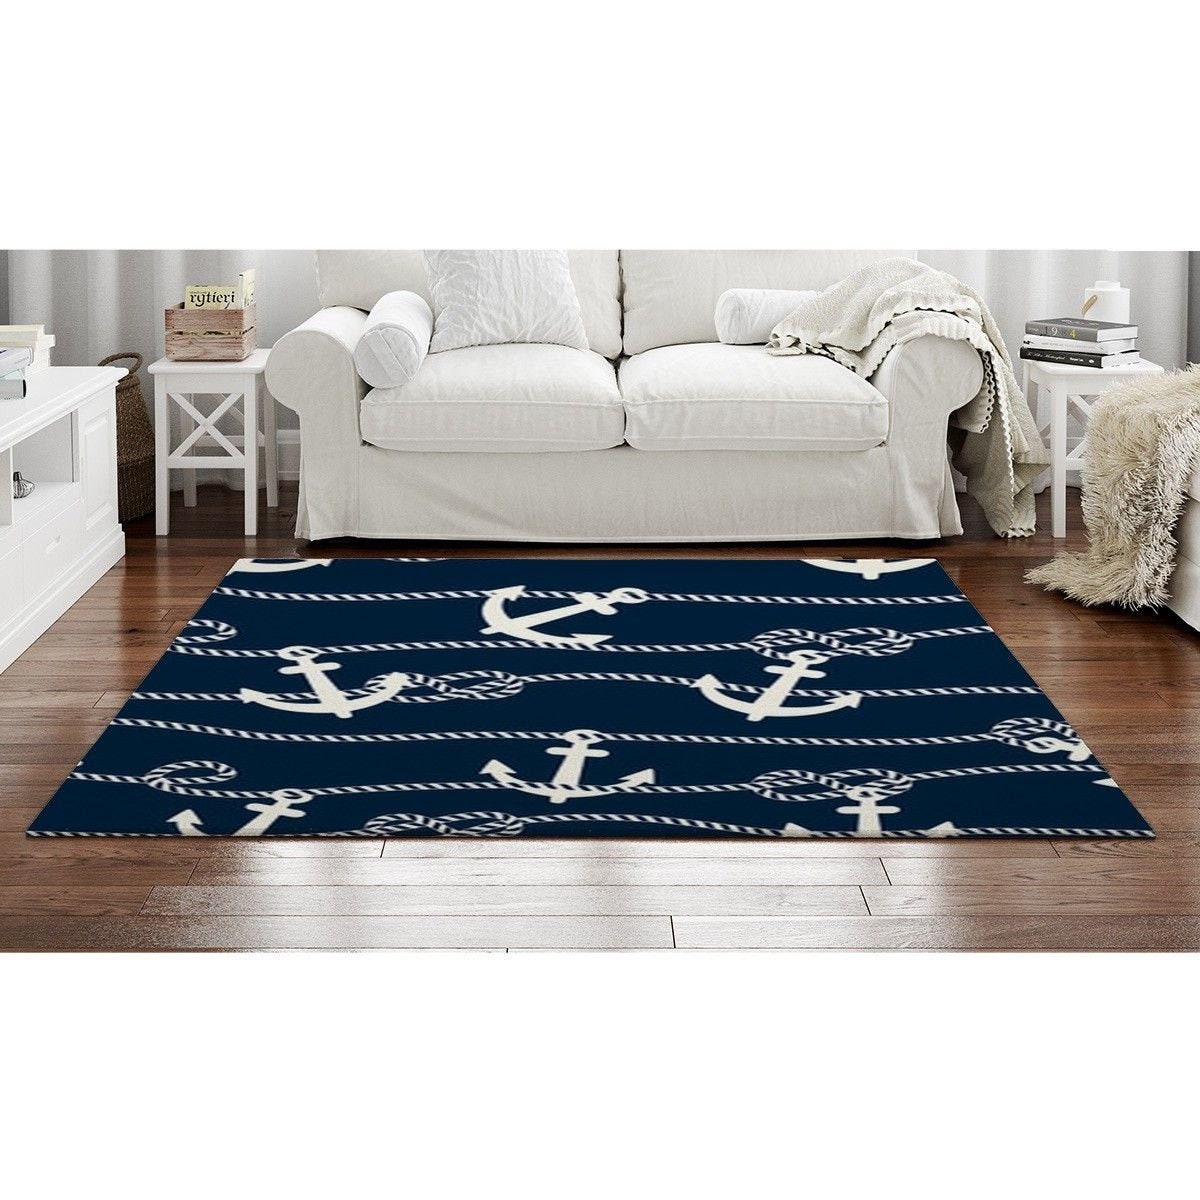 Details about   Nautical Lighthouse Seashore Seaside Accent Rug Anchor Lifesaver Ring Accent Rug 